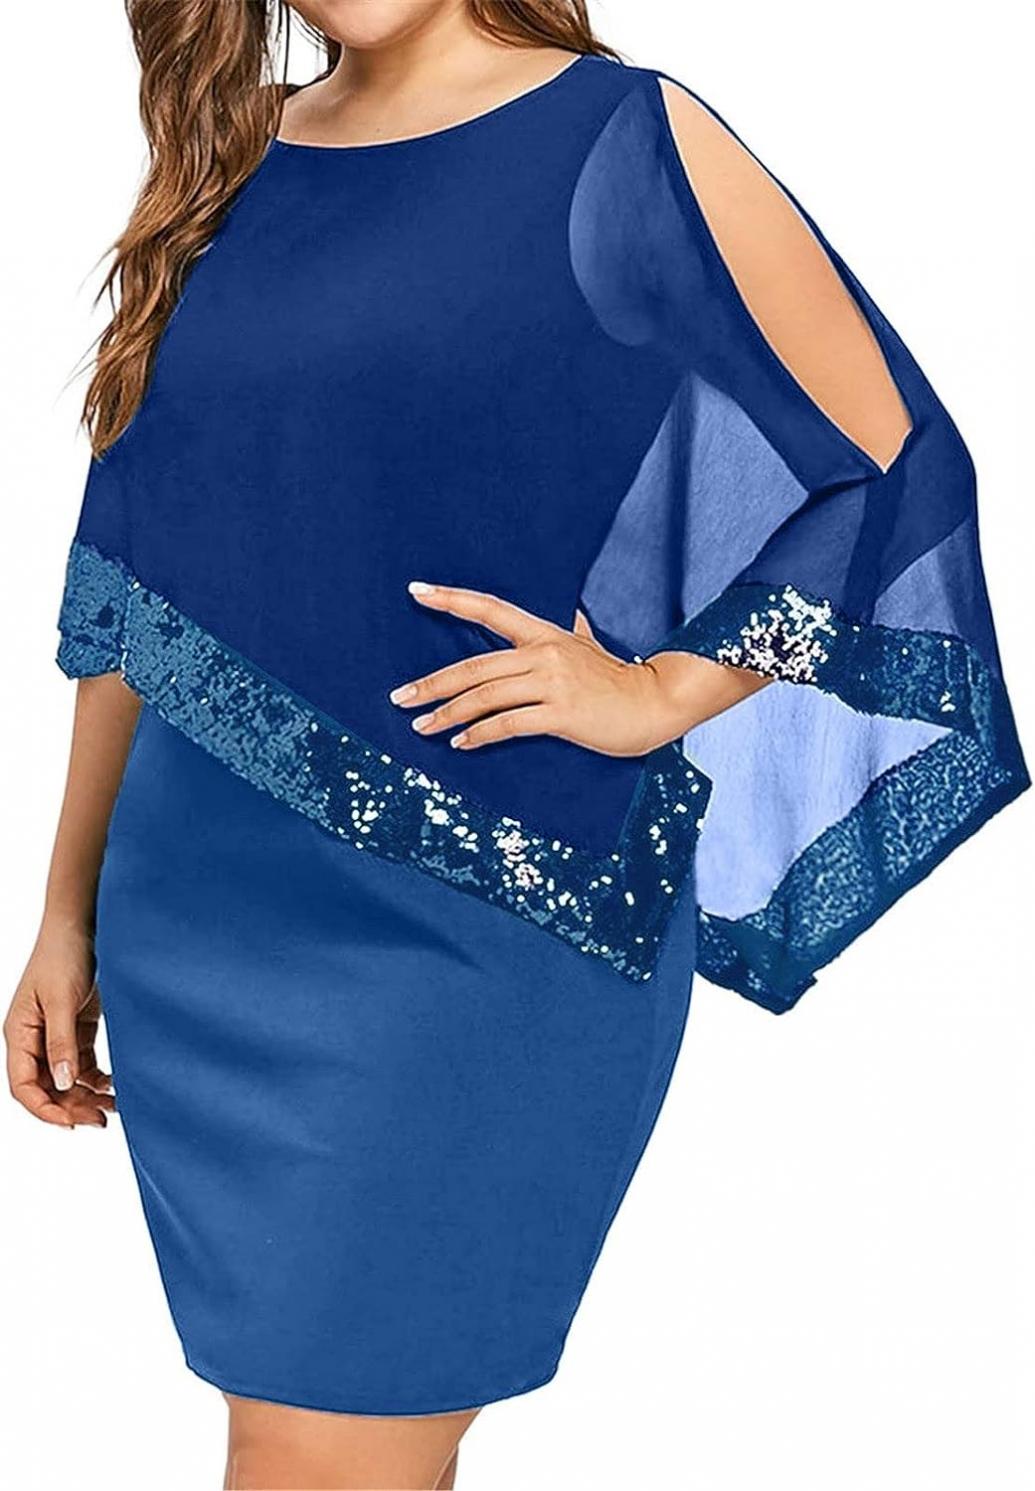 Formal Wedding Guest Dress,Plus Size Cold Shoulder Overlay Asymmetric Chiffon Strapless Sequins Dress（S-5XL） Outfits